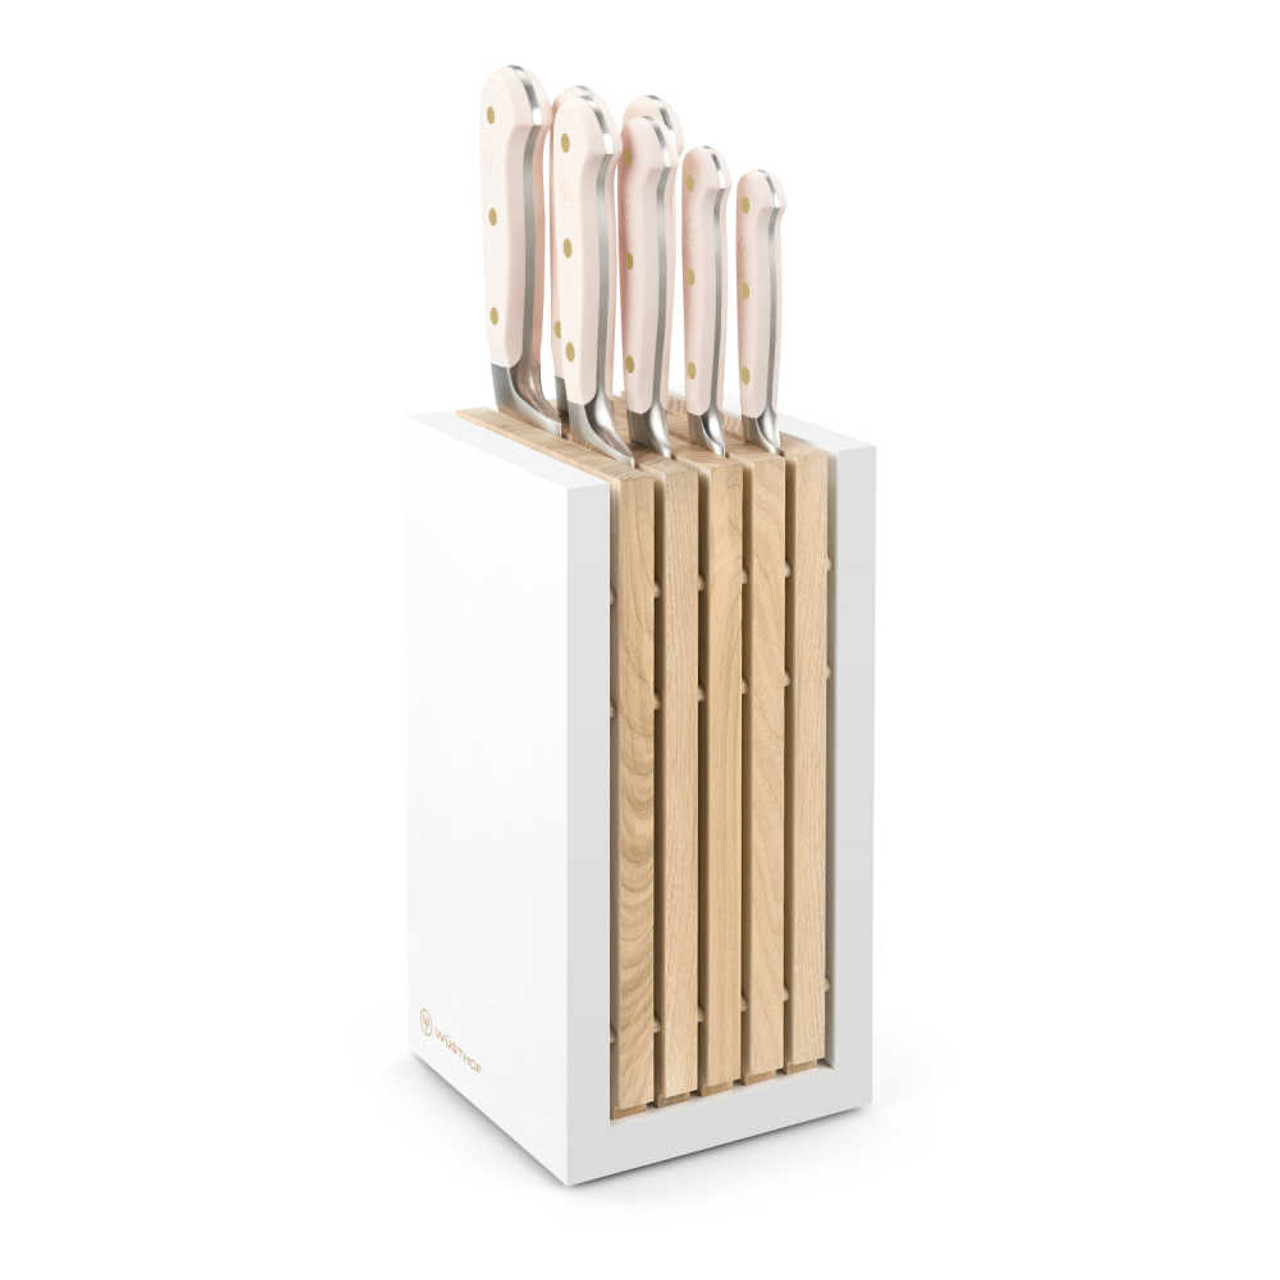 https://cdn11.bigcommerce.com/s-hccytny0od/images/stencil/1280x1280/products/5391/23394/Wusthof_Classic_Color_8-Piece_Knife_Block_Set_Pink_Himalayan_Salt__31293.1682004536.jpg?c=2?imbypass=on